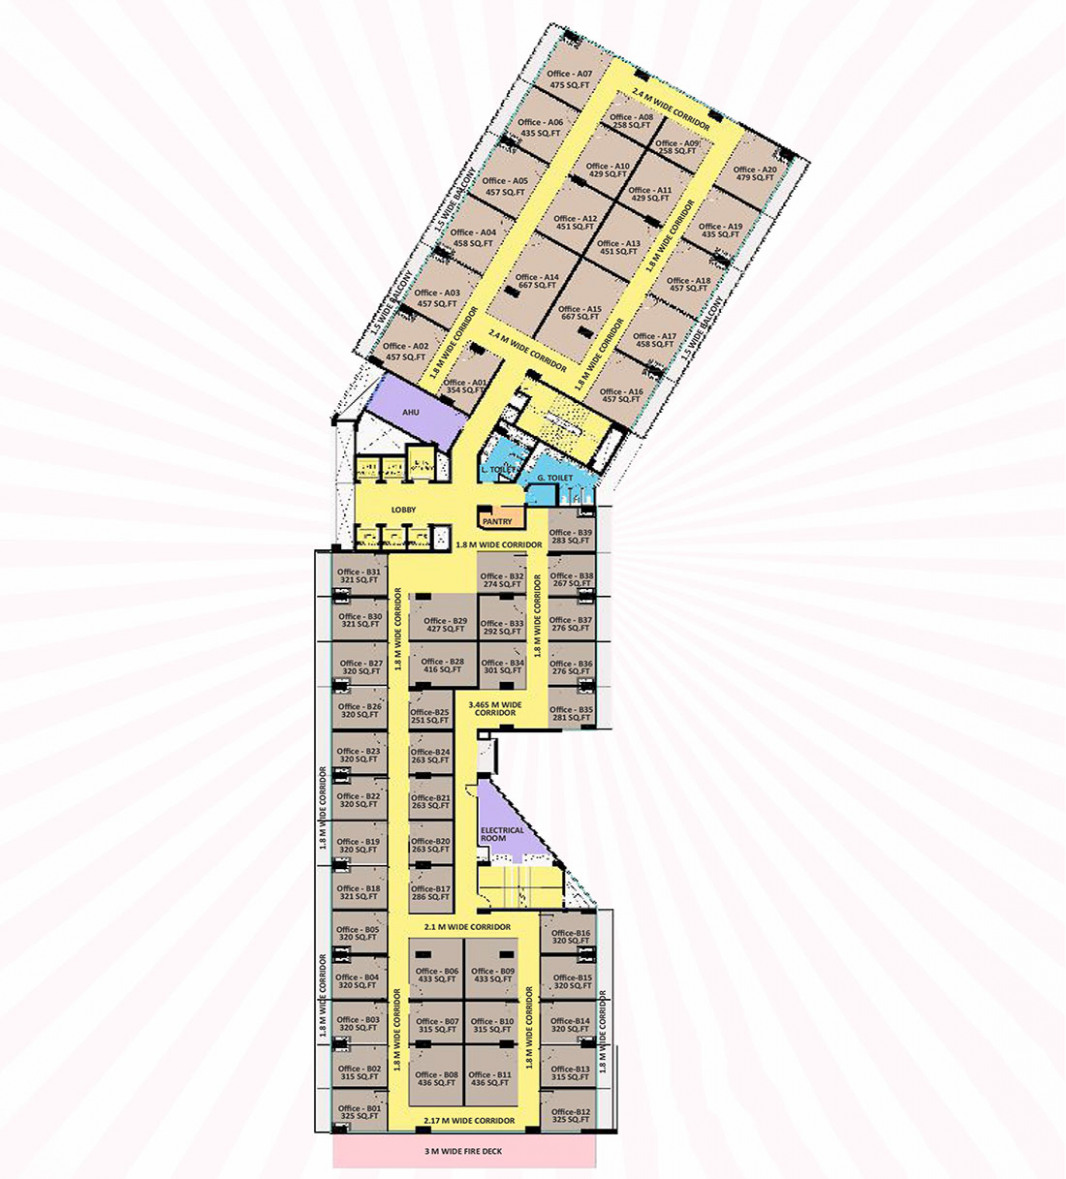 nx one trade center office spaces floor plan